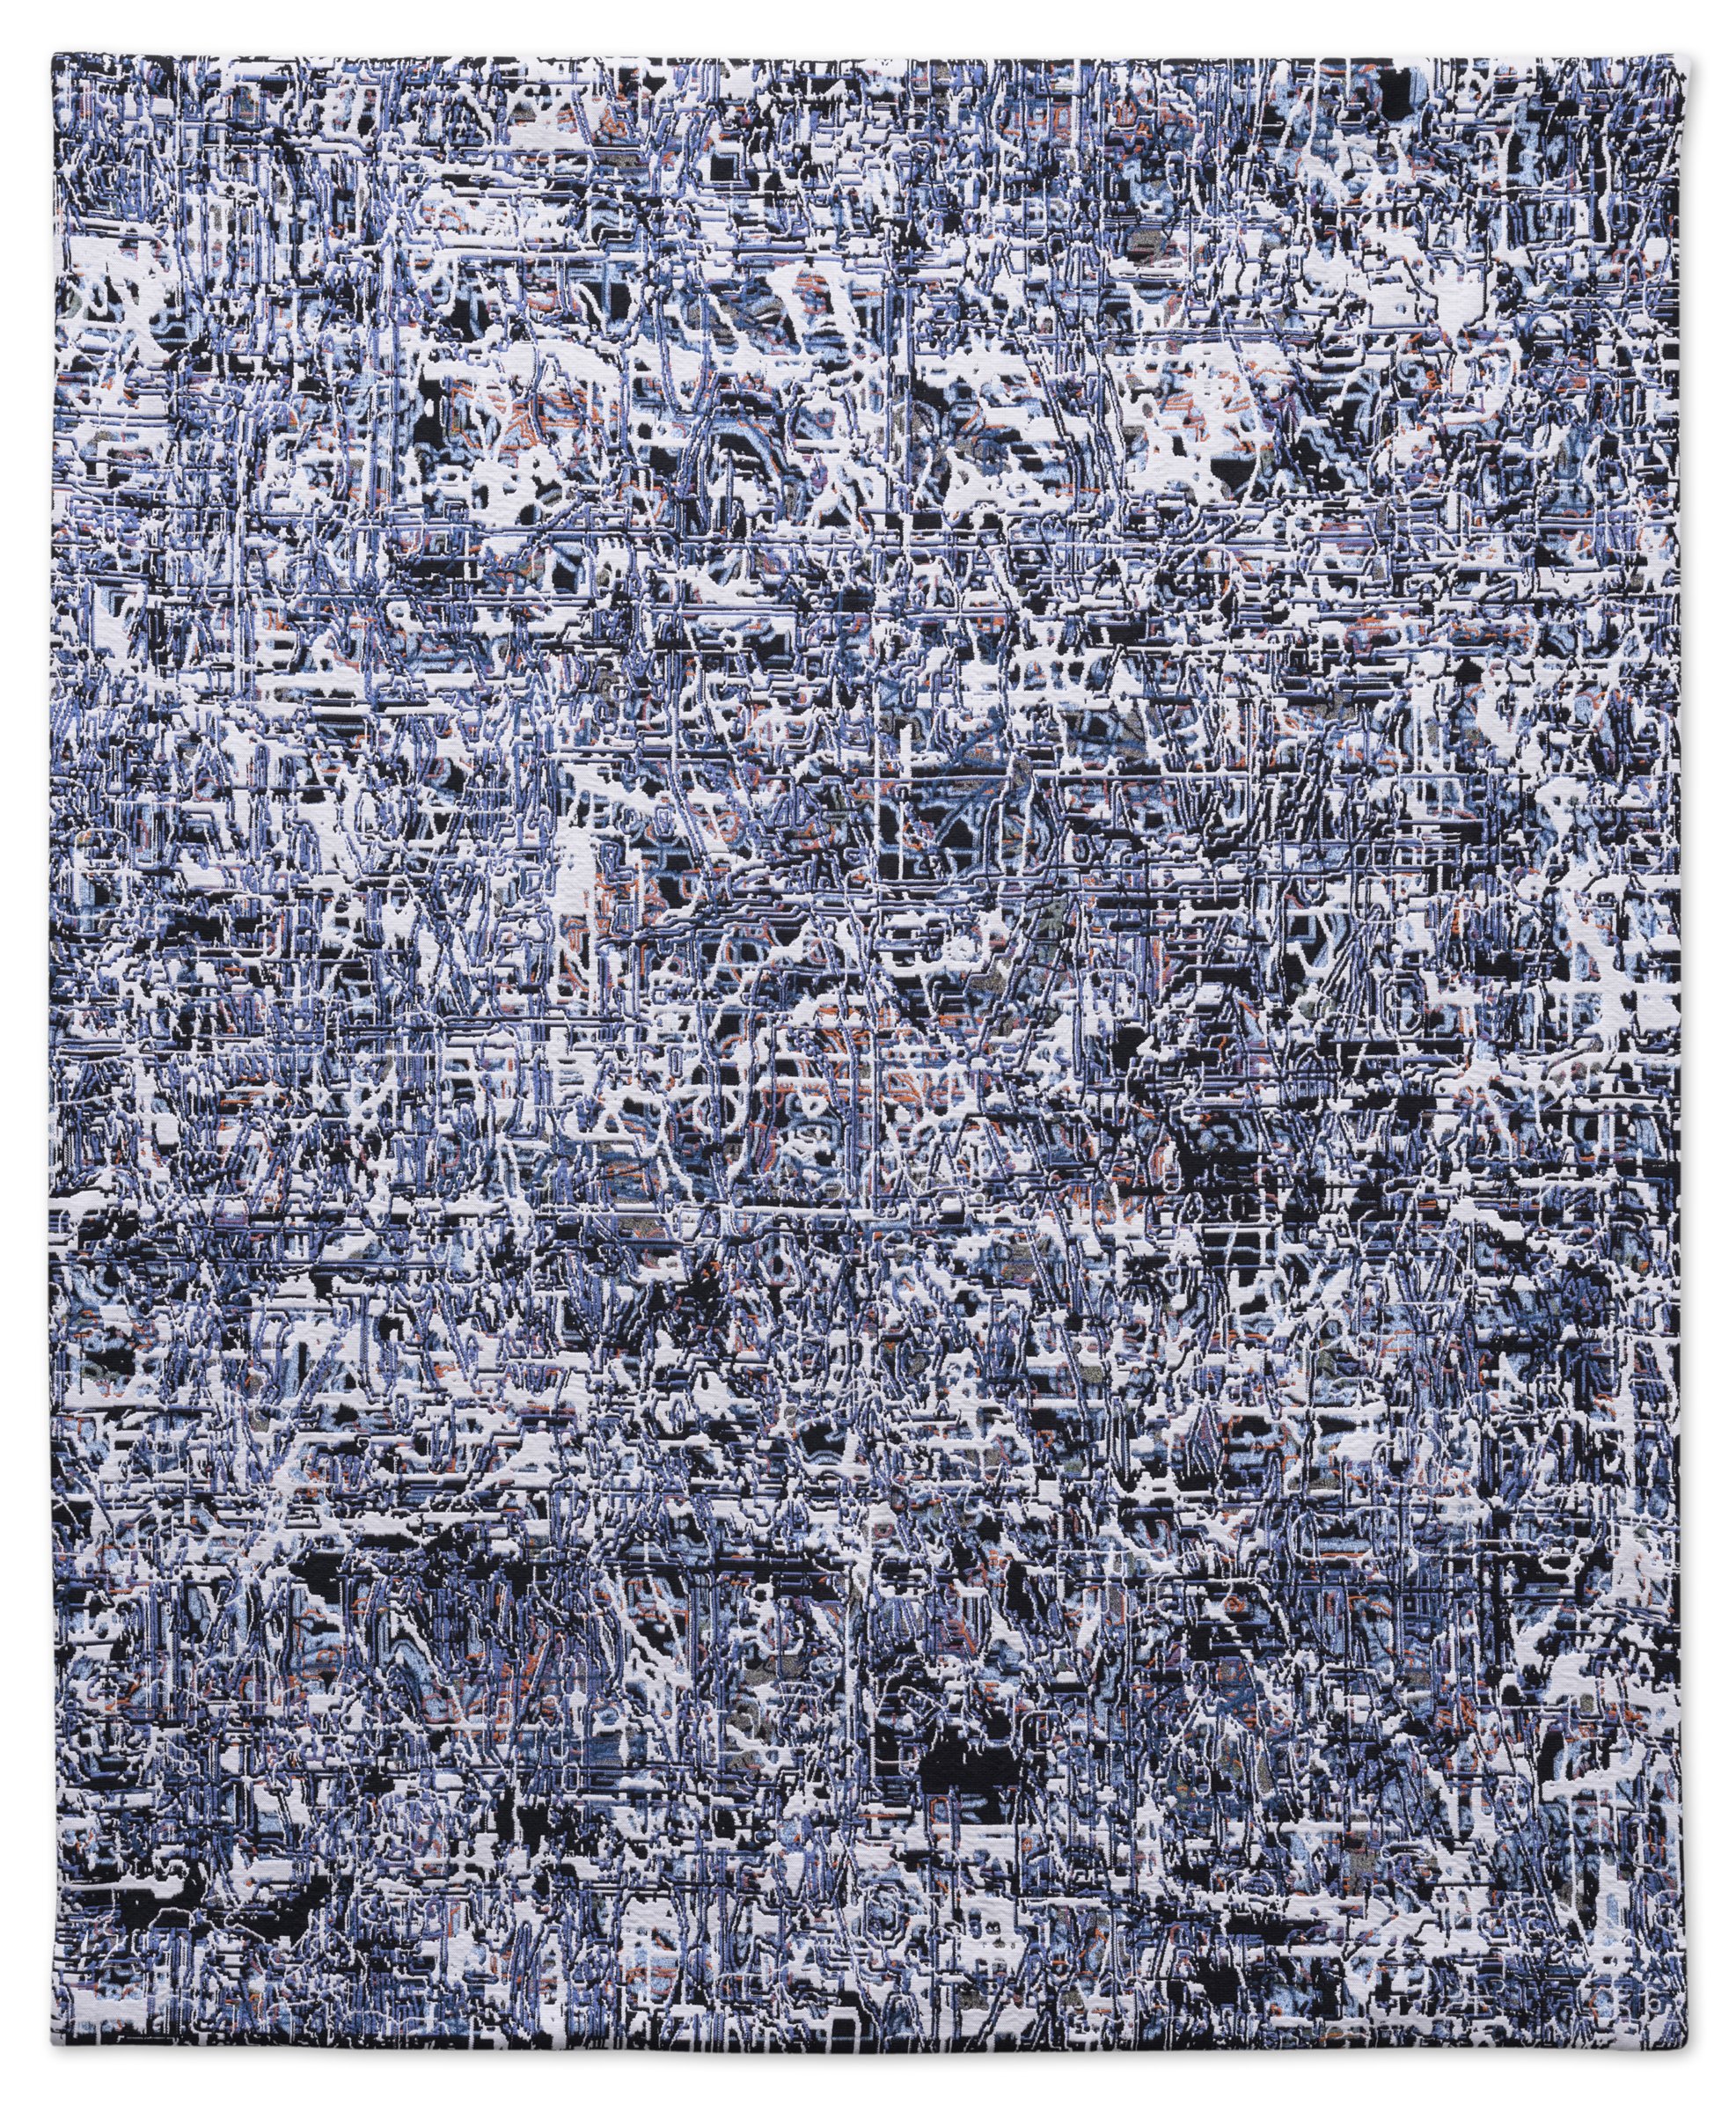   Grand Loop Variation, No. 1,  2023 Jacquard tapestry, edition of 6 + proofs 96 x 80 inches  